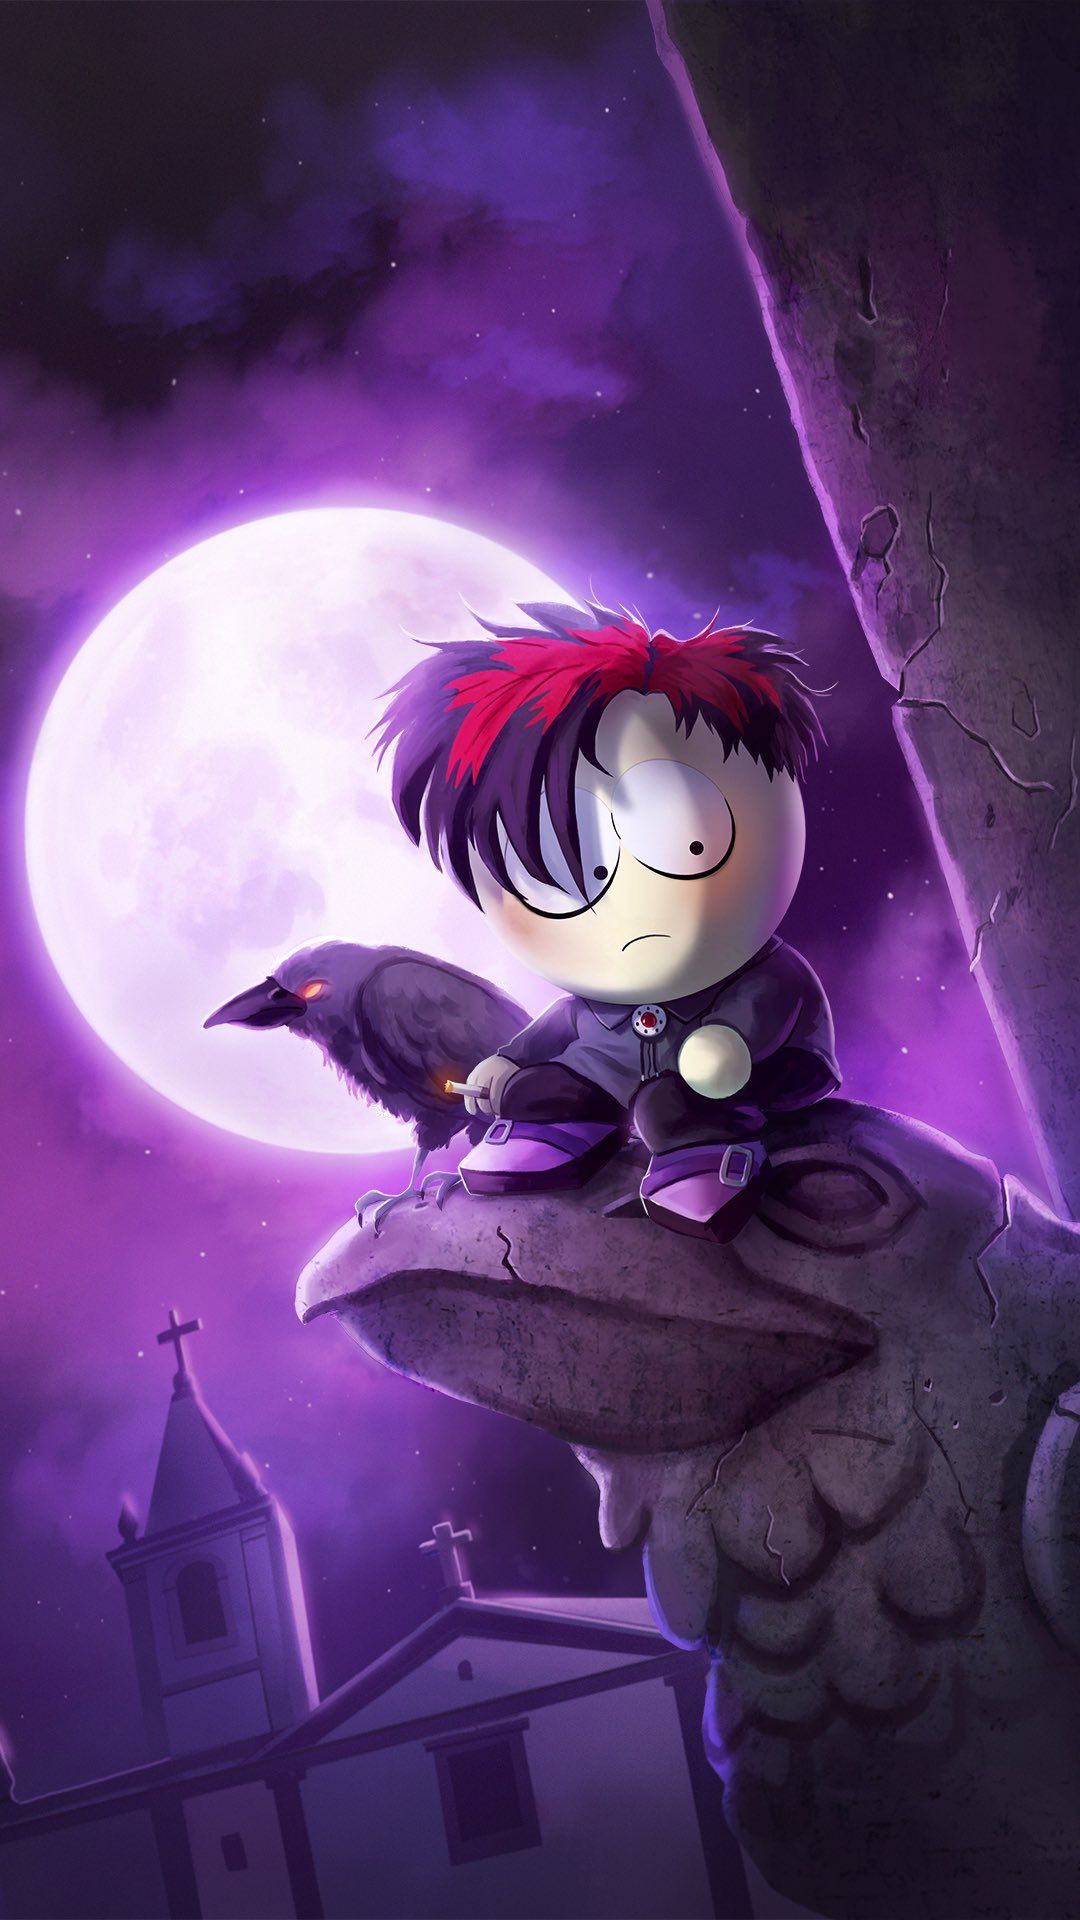 South Park is pain. Life is only pain. Goth Kids wallpaper courtesy of